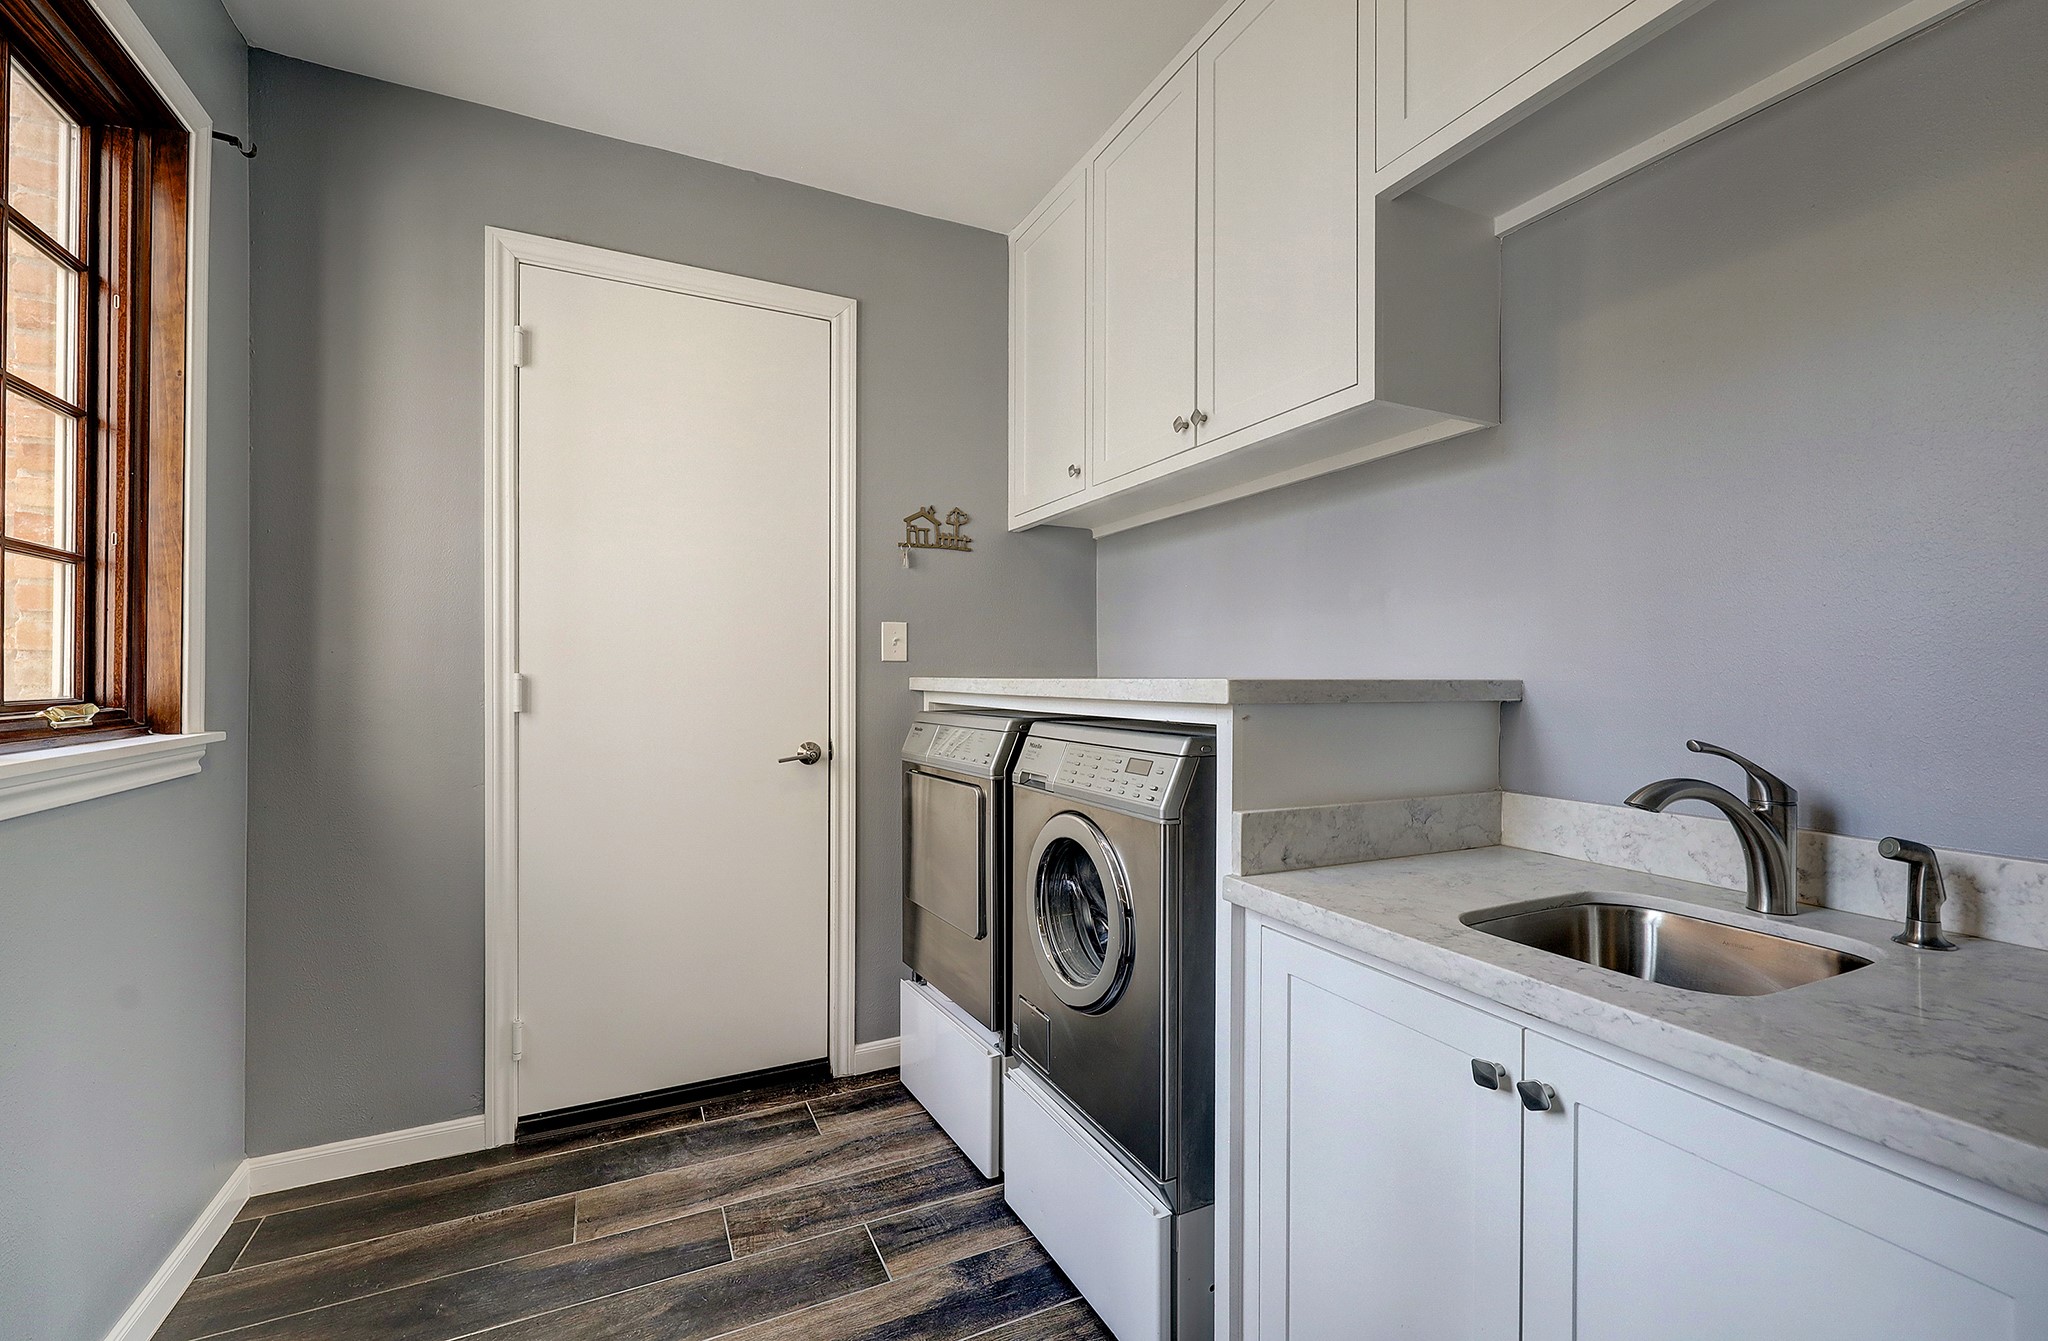  Have fun doing your laundry is this utility room with a sink, window and folding table counter top.